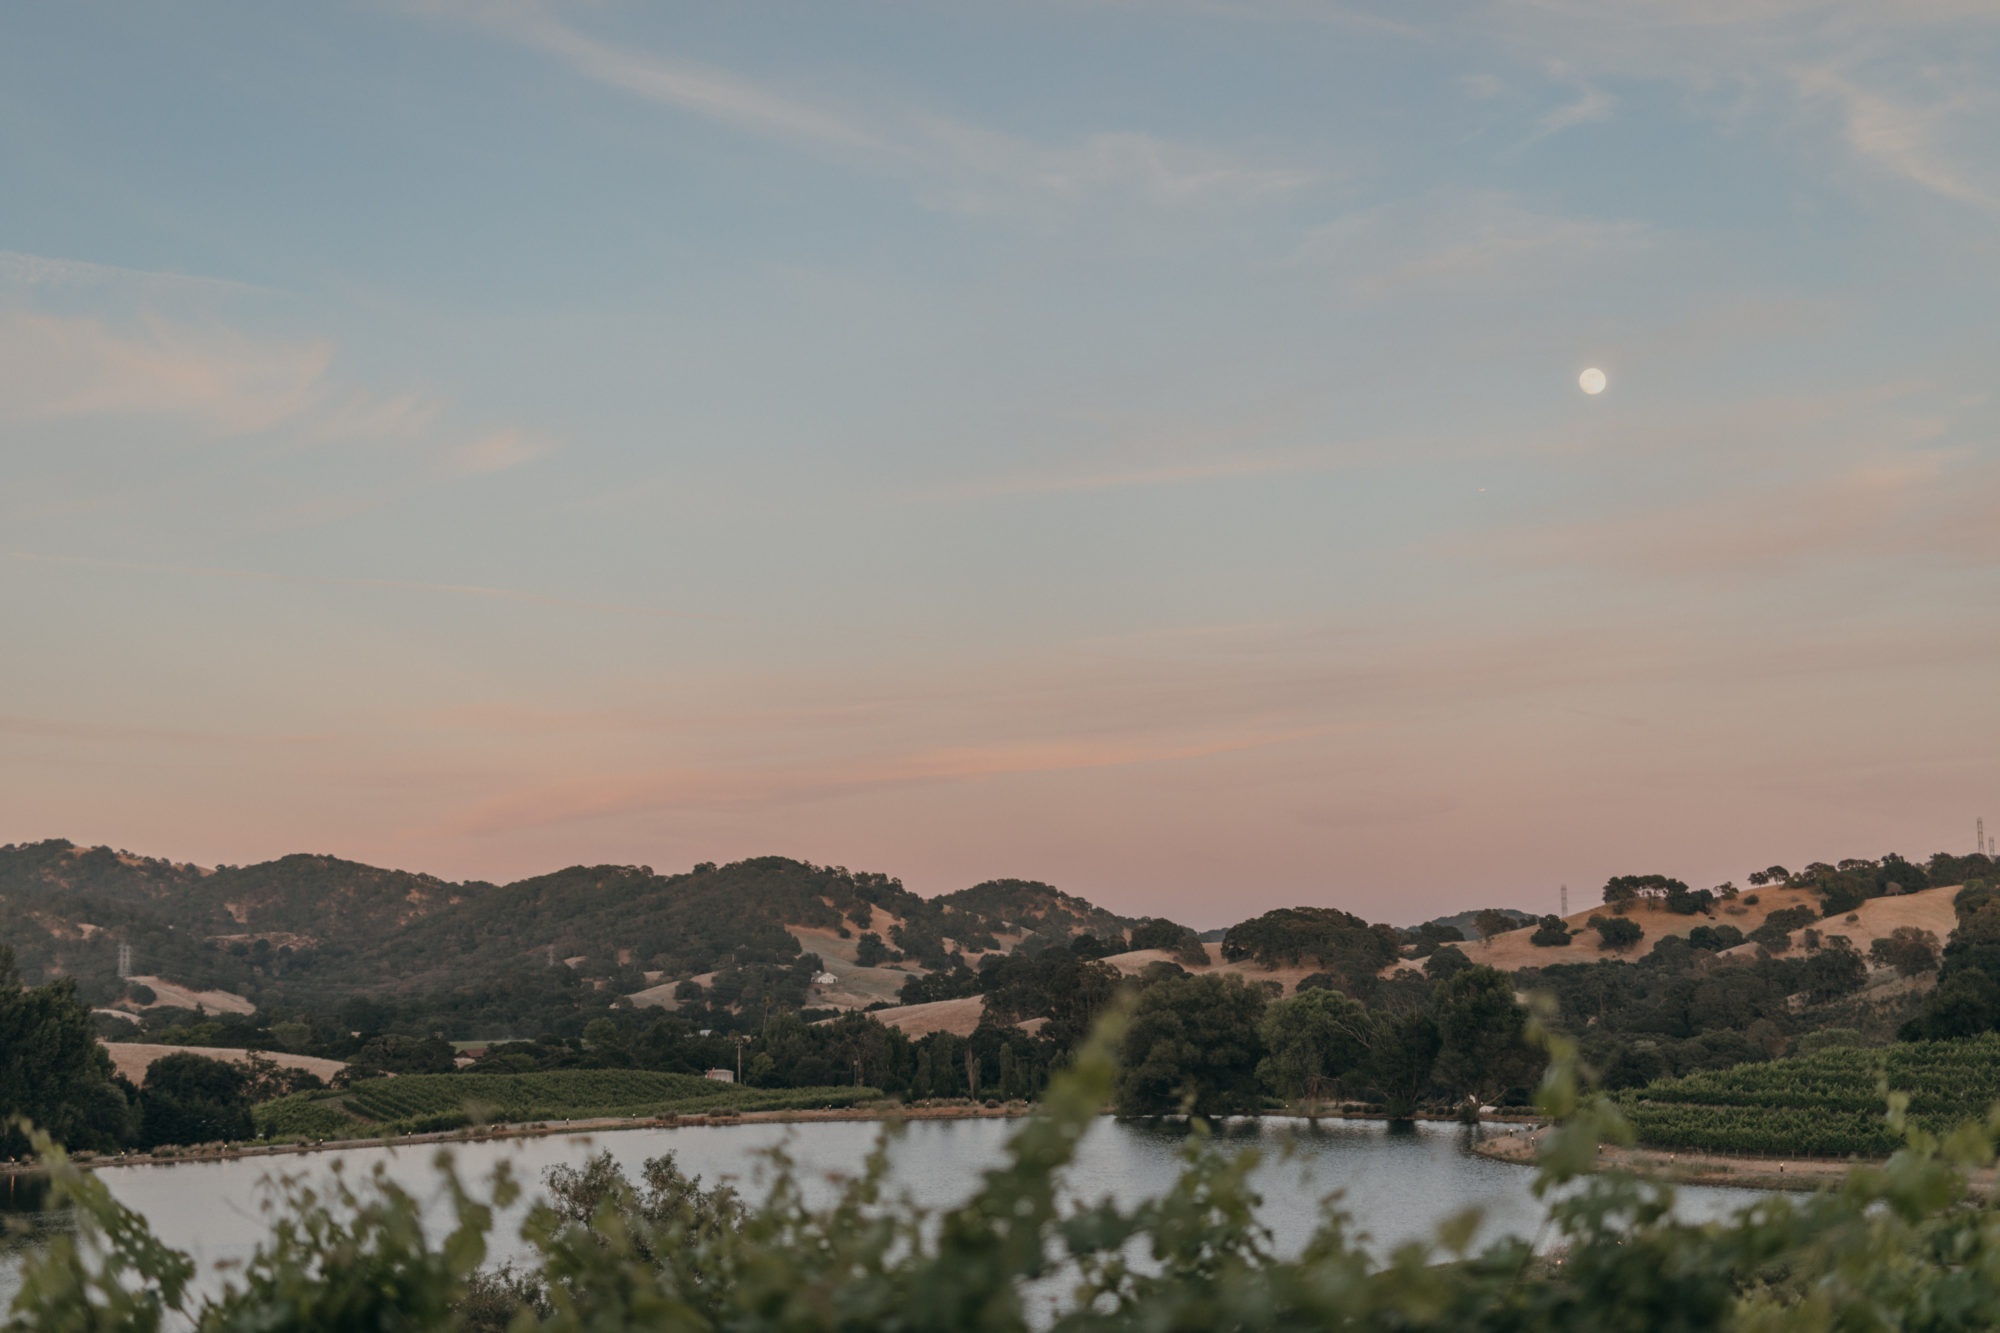 A view of the vineyard after sunset.